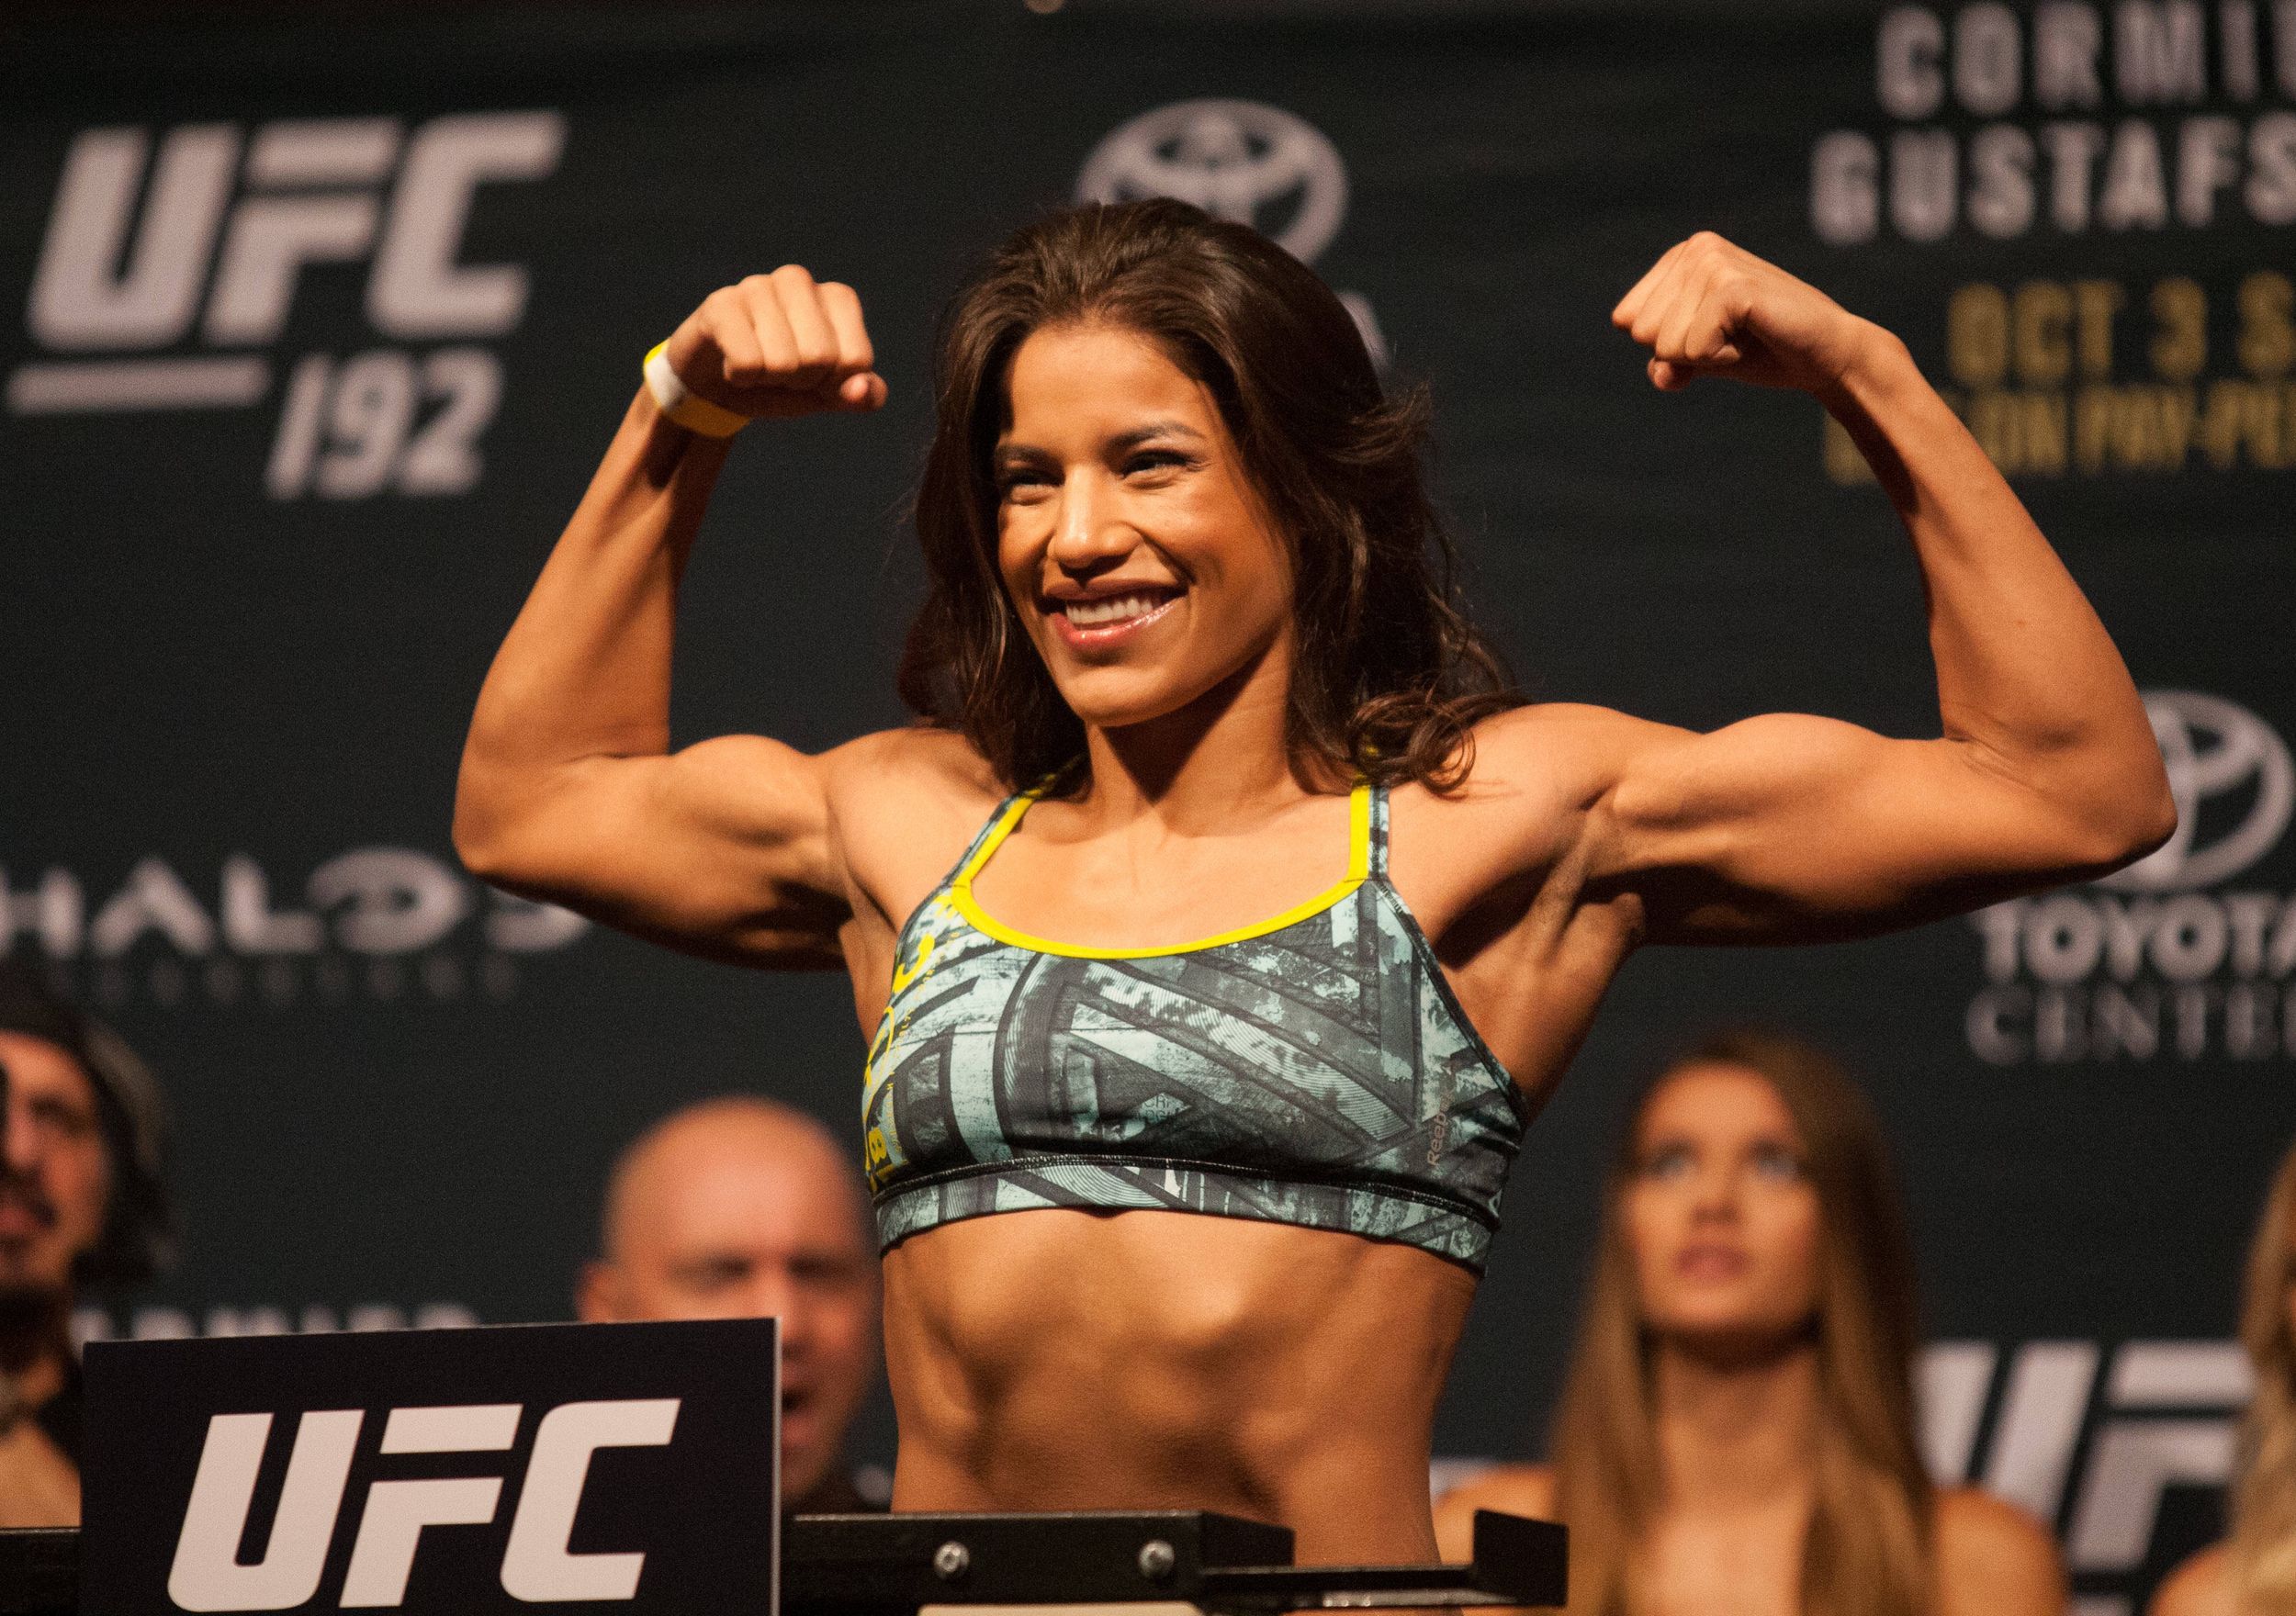 Spokane’s Julianna Pena improves to 3-0 in UFC with unanimous decision